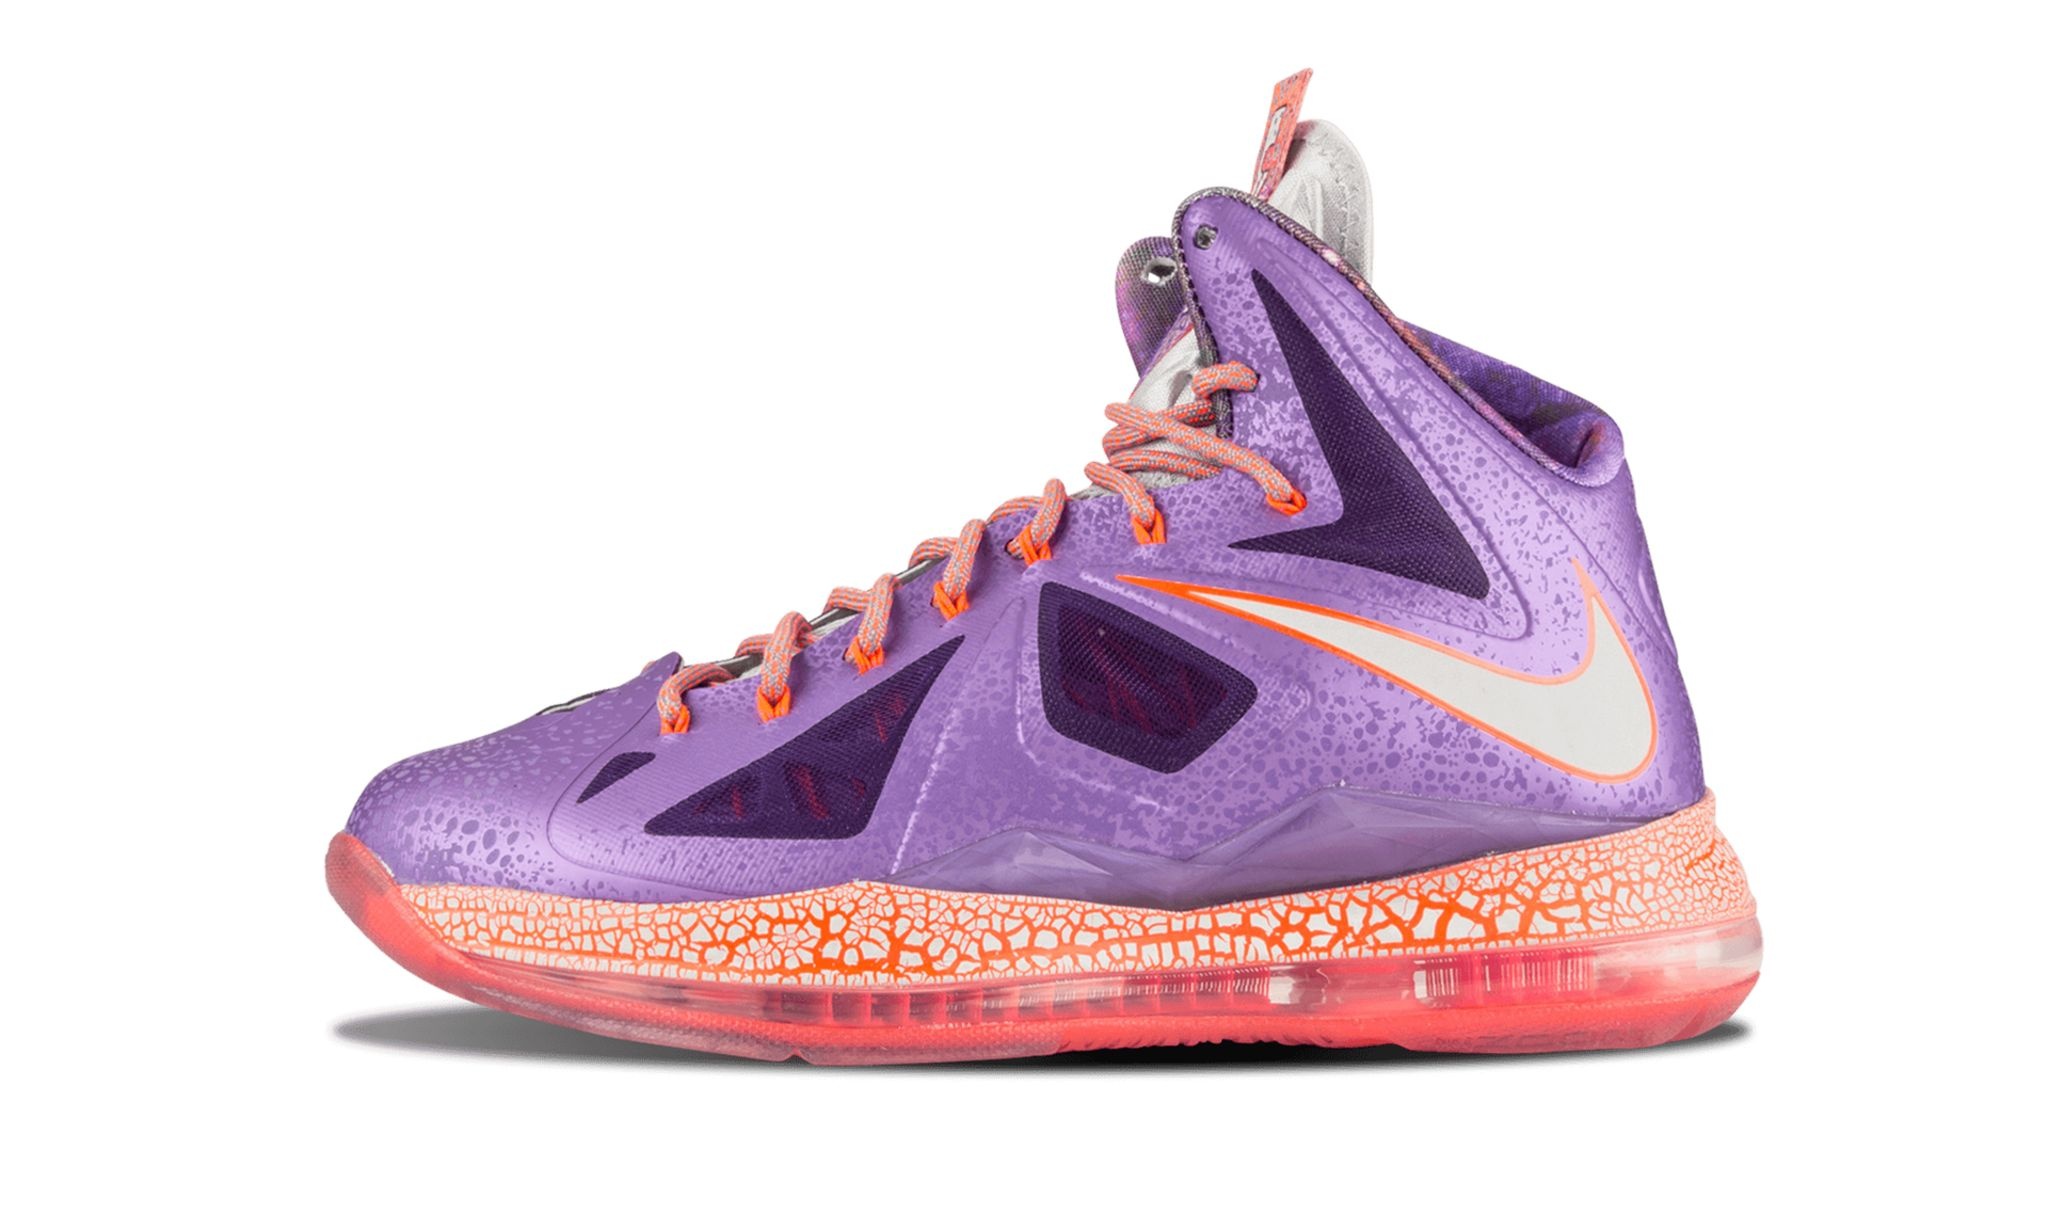 Lebron 10 - AS "Extraterrestrial" - 1